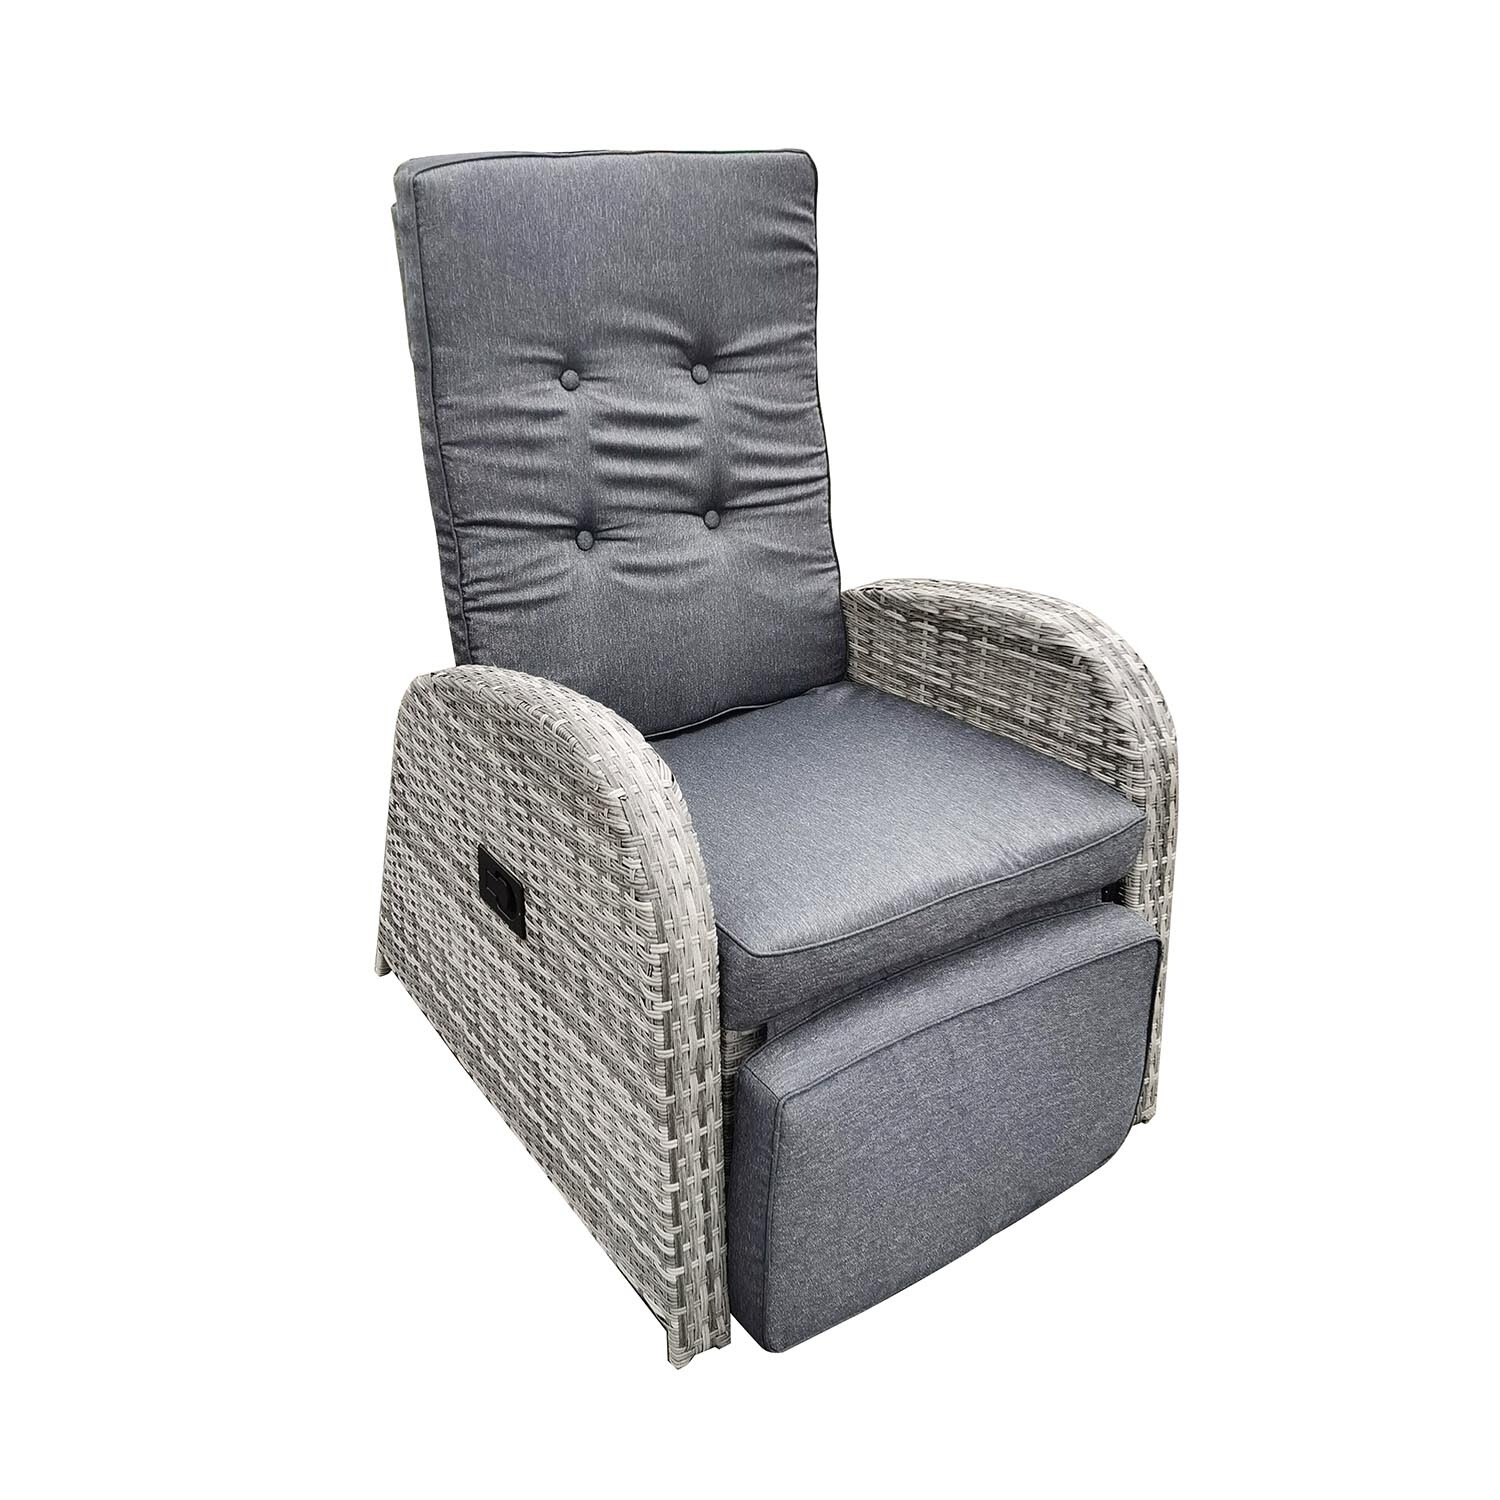 Malay Deluxe Malay New Hampshire Grey Wicker Reclining Chair Image 2